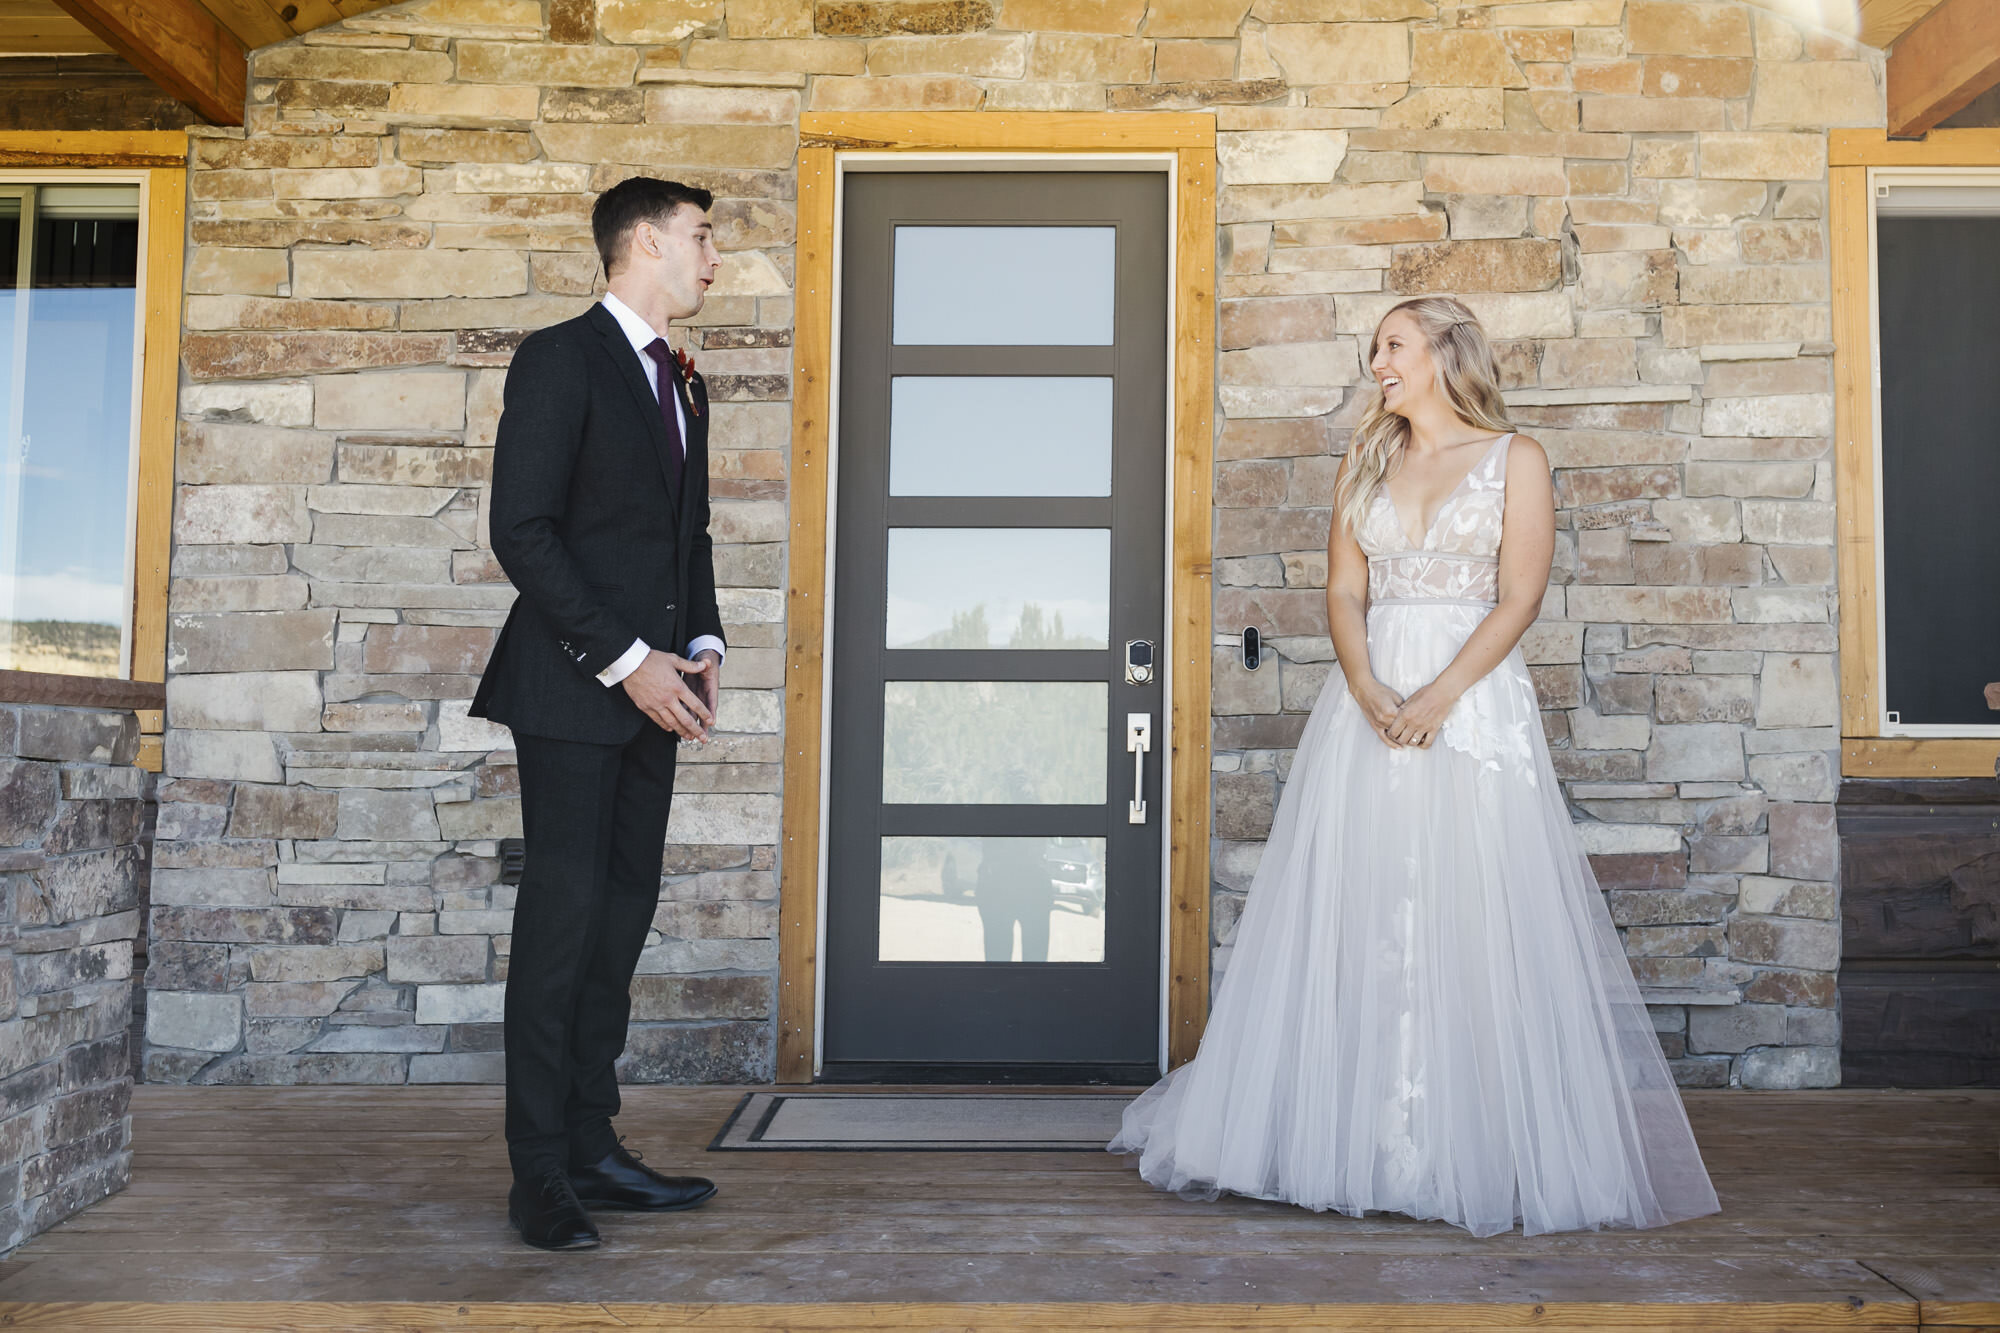 Groom reacts to seeing his bride for the first time on the wedding day in Utah